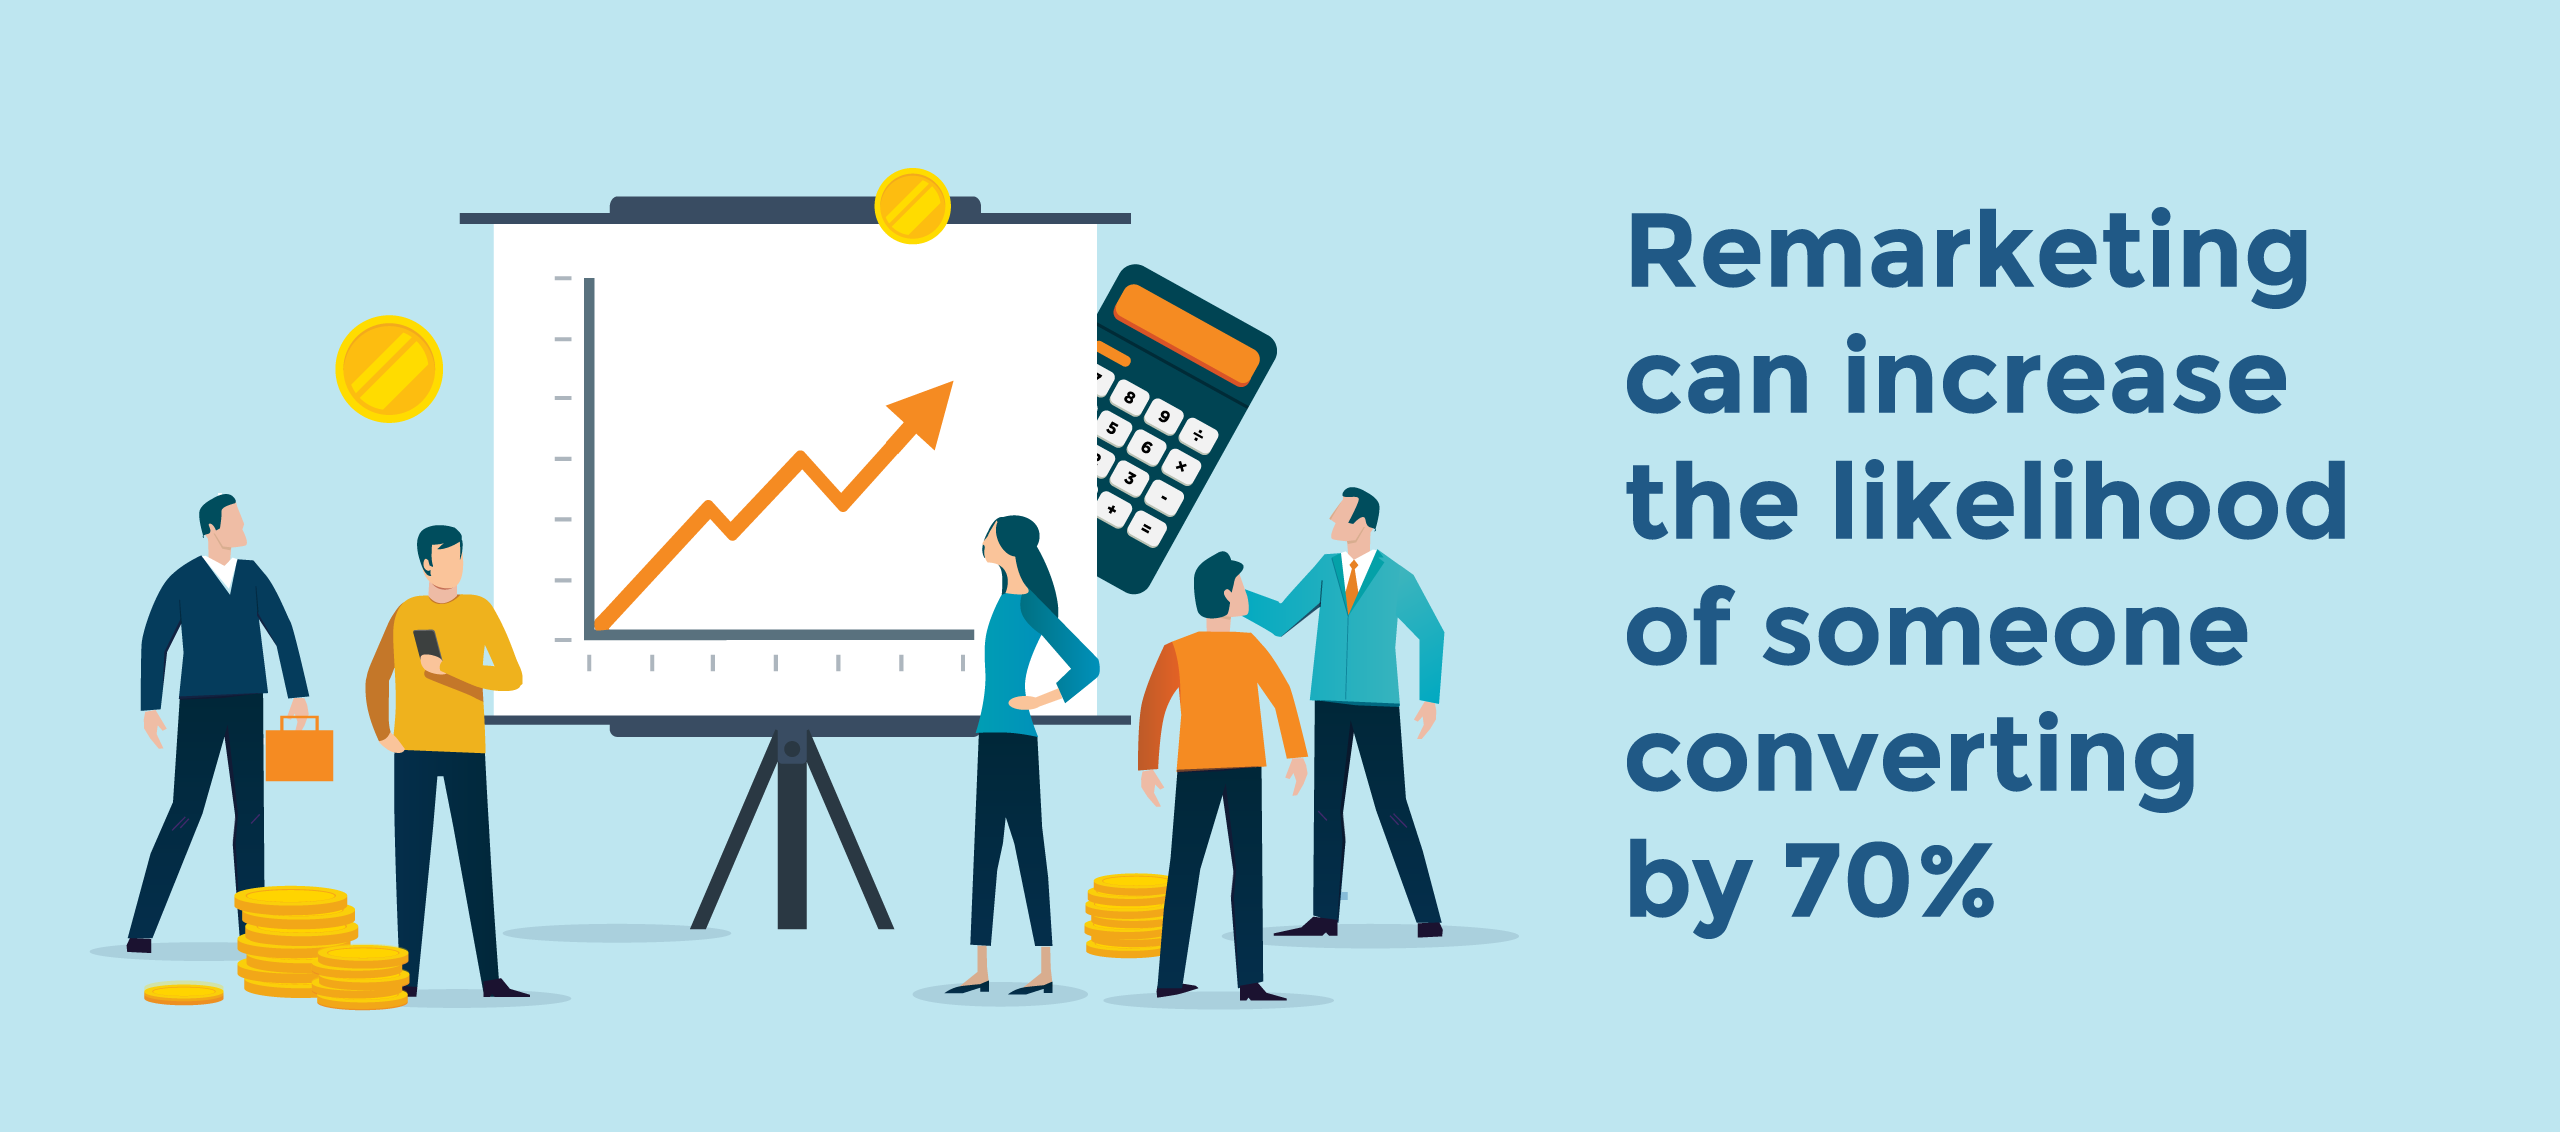 Remarketing increases the likelihood of someone to convert